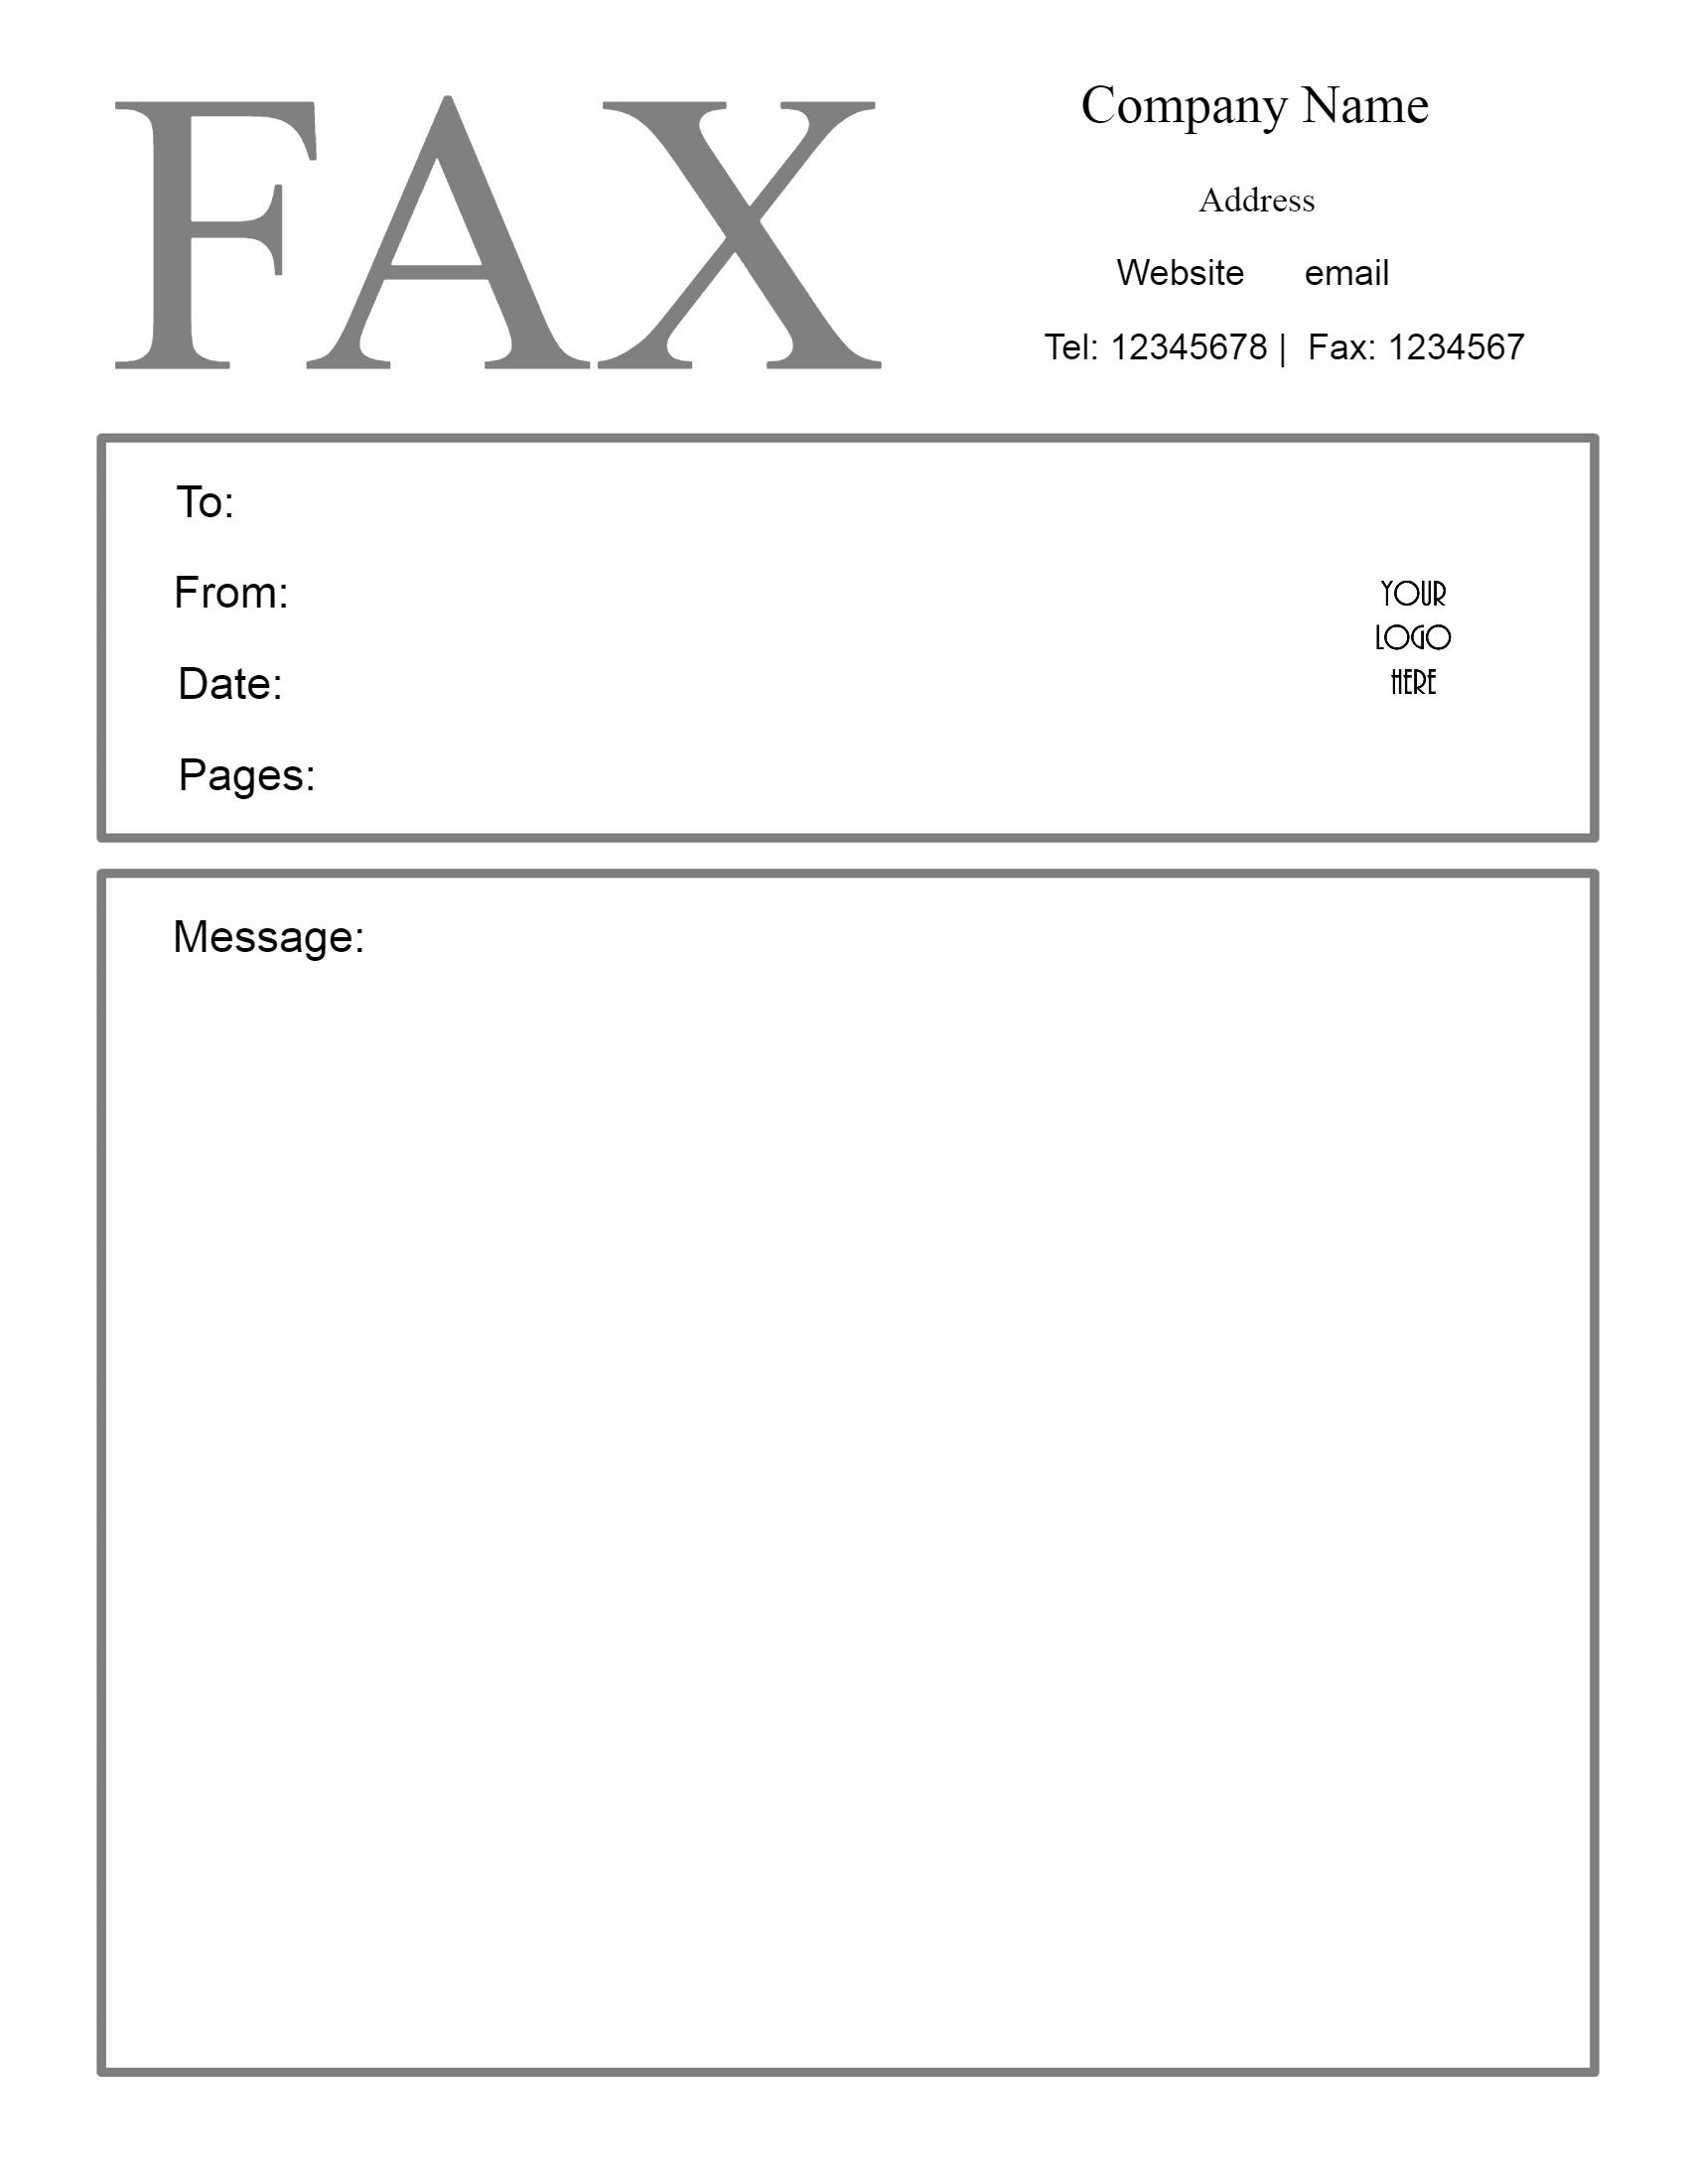 Free Fax Cover Sheet Template | Customize Online Then Print - Free Printable Fax Cover Page